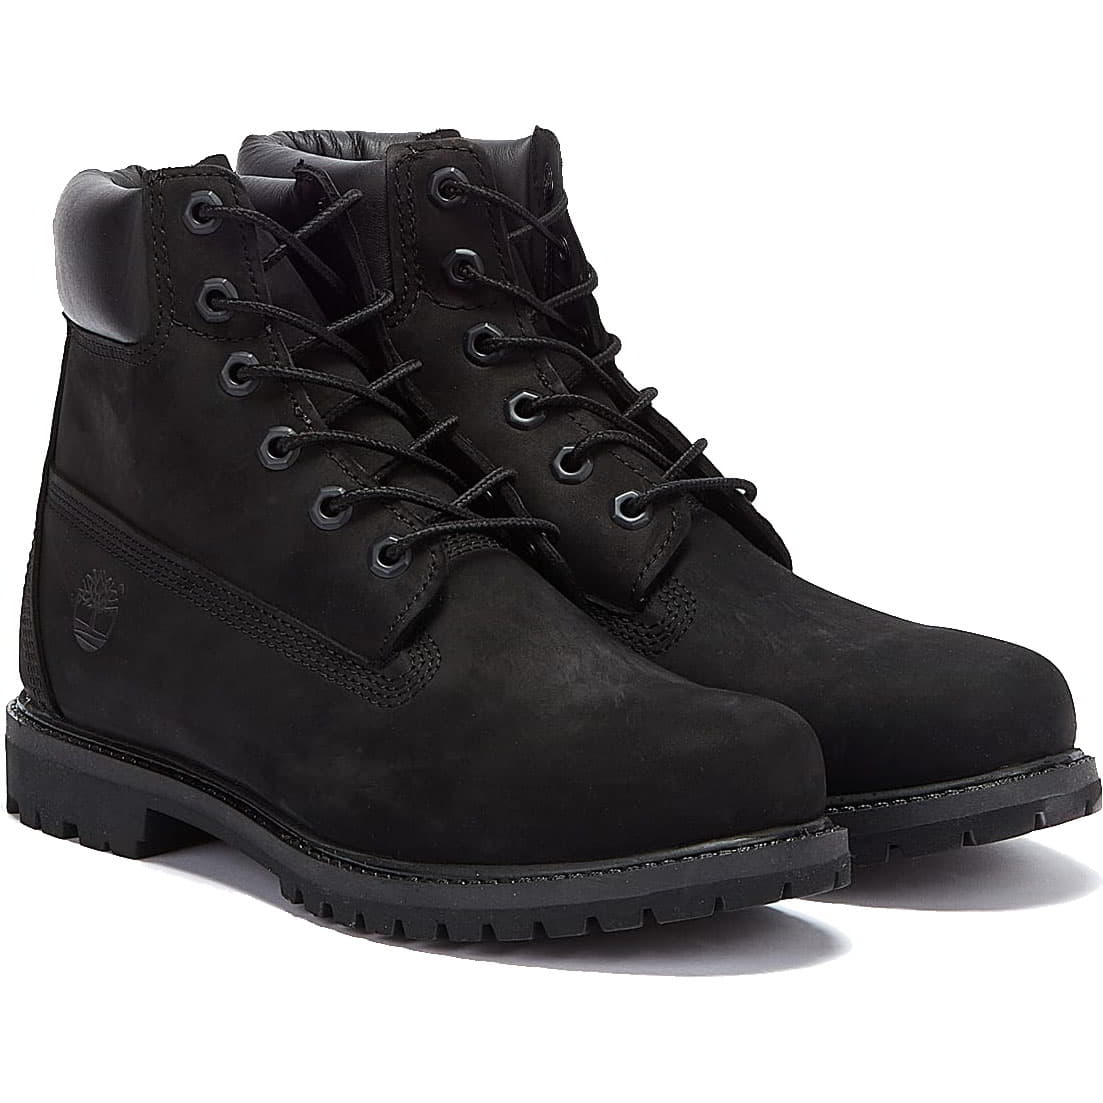 Timberland Icon Women's 6 Inch Premium Waterproof Boots Wide Fit - Black - UK 4